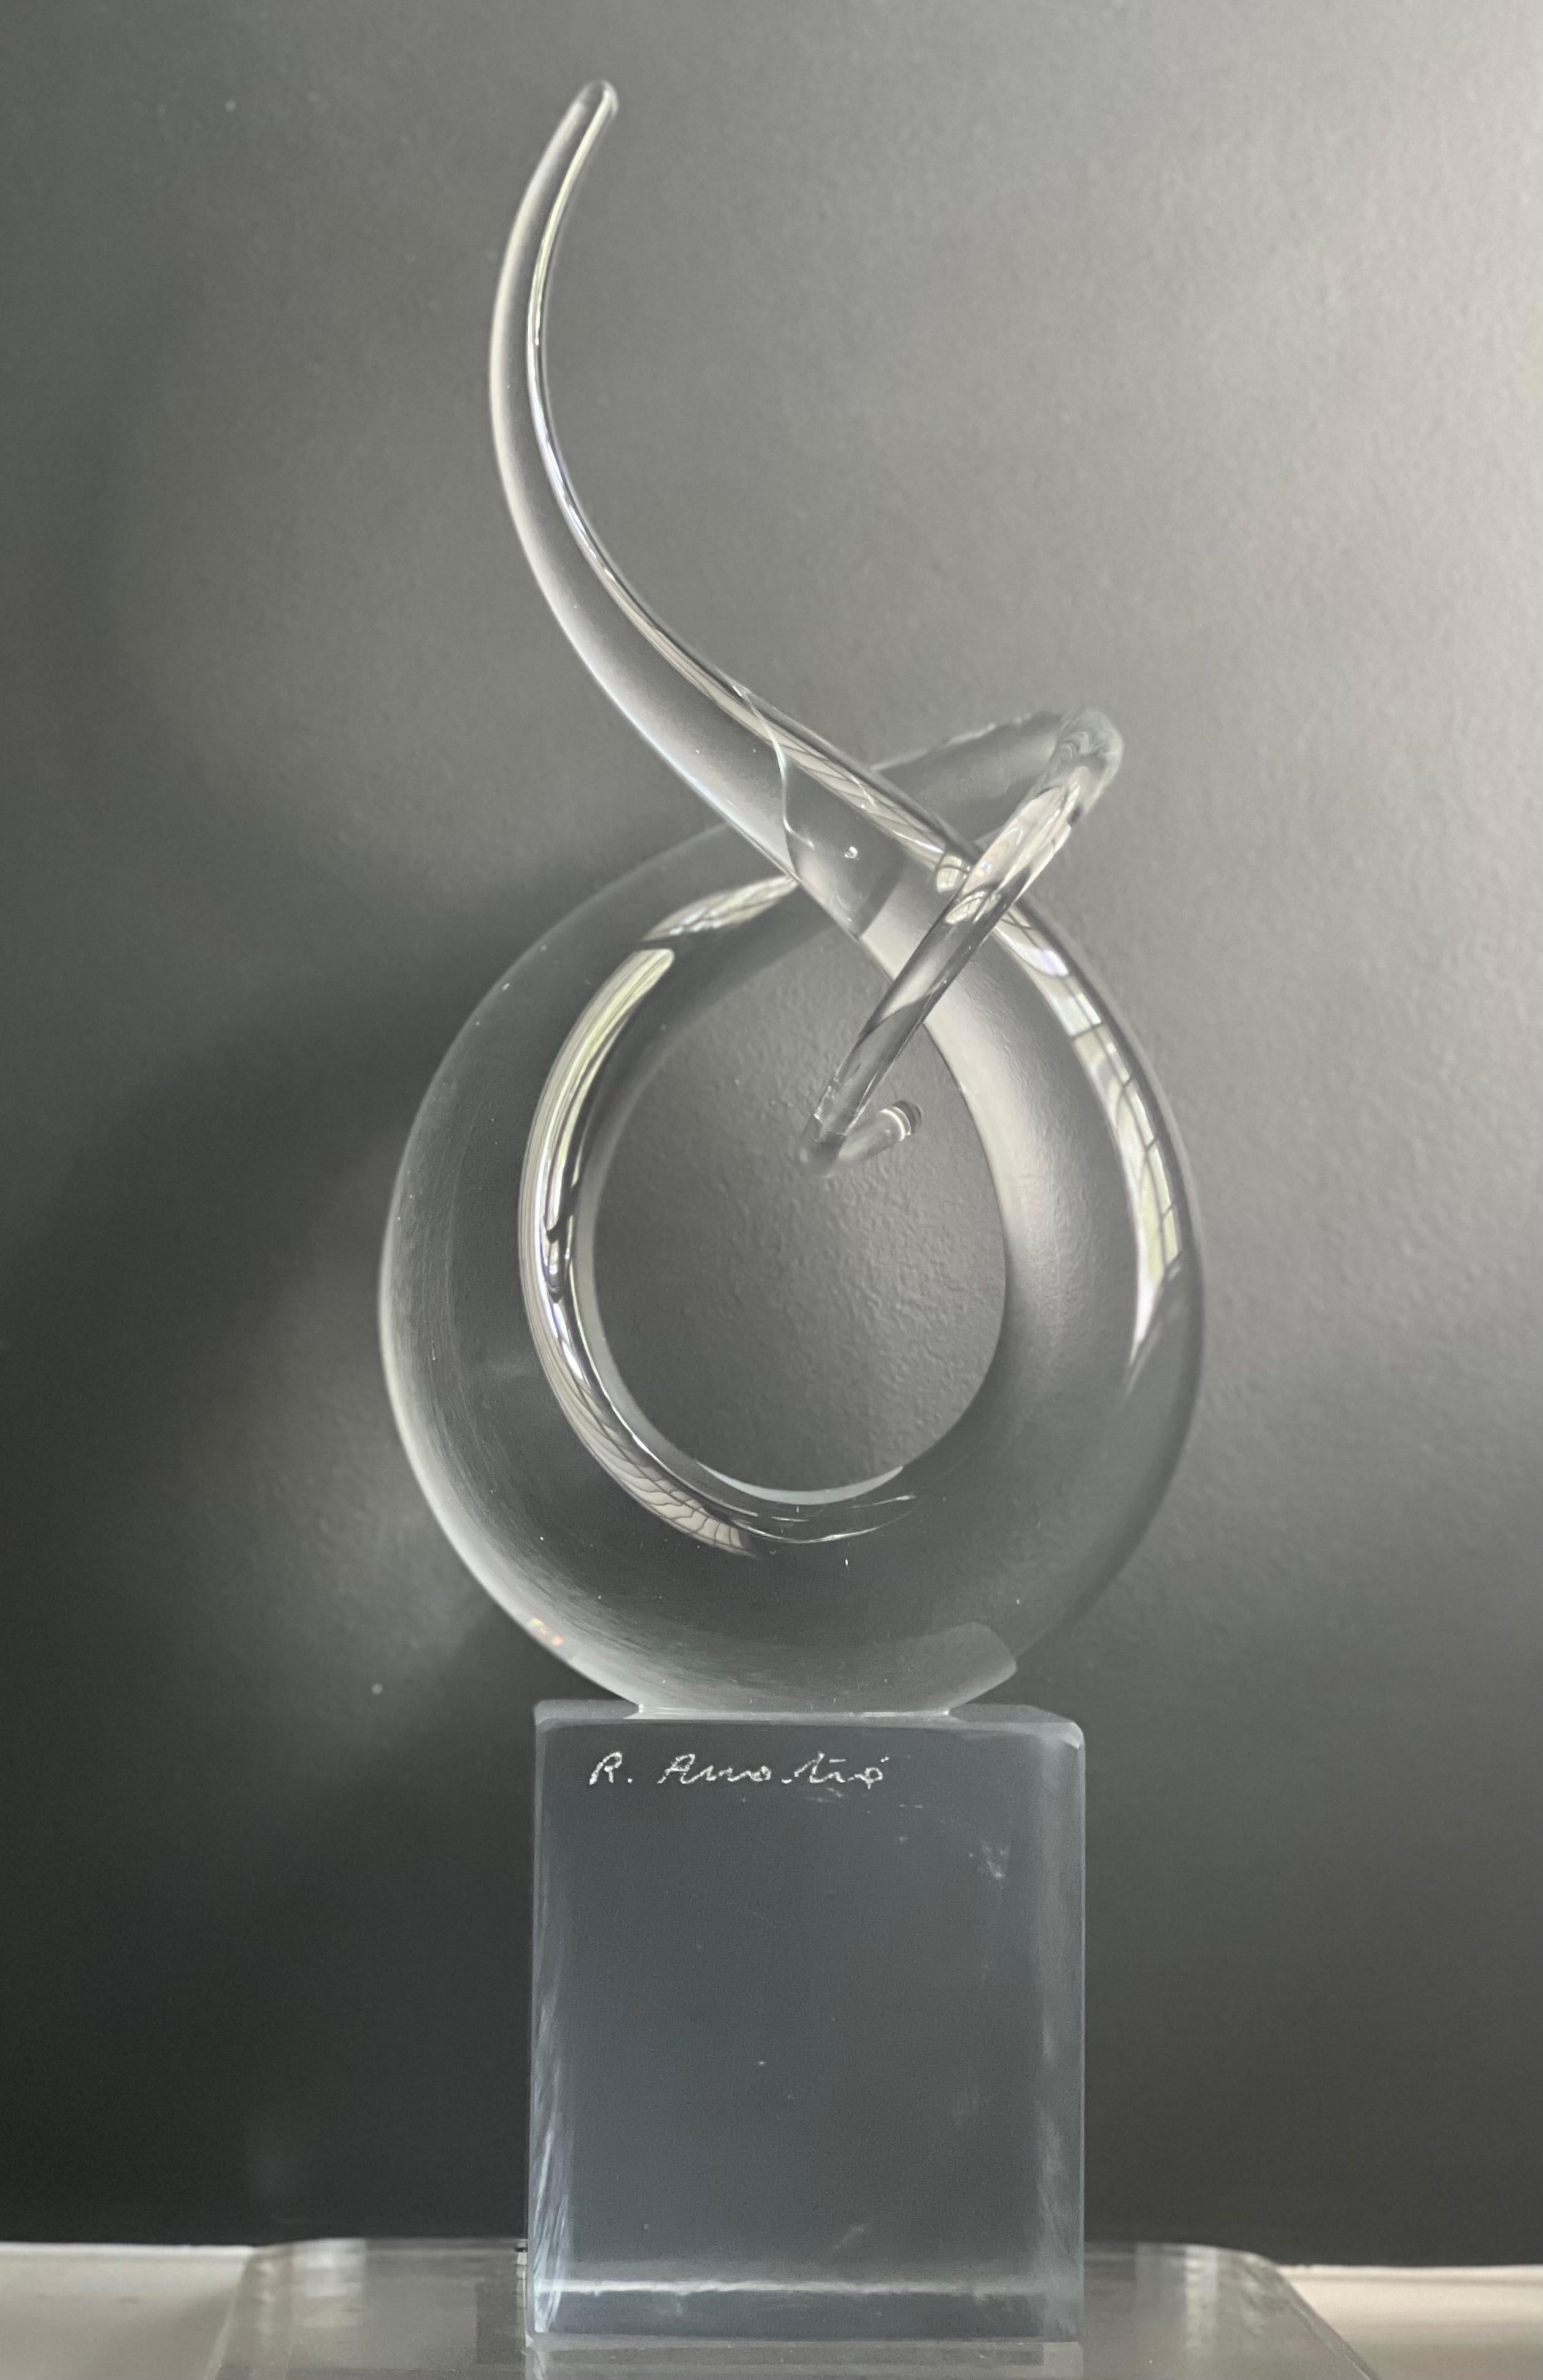 Elegant 'Love Knot' abstract sculpture by Renato Anatrà, signed, Italy.

Representing eternal love, this graceful sculpture is beautifully hand crafted of clear Murano glass by Renato Anatrà. Born in 1943, Anatrà is one of the most prominent